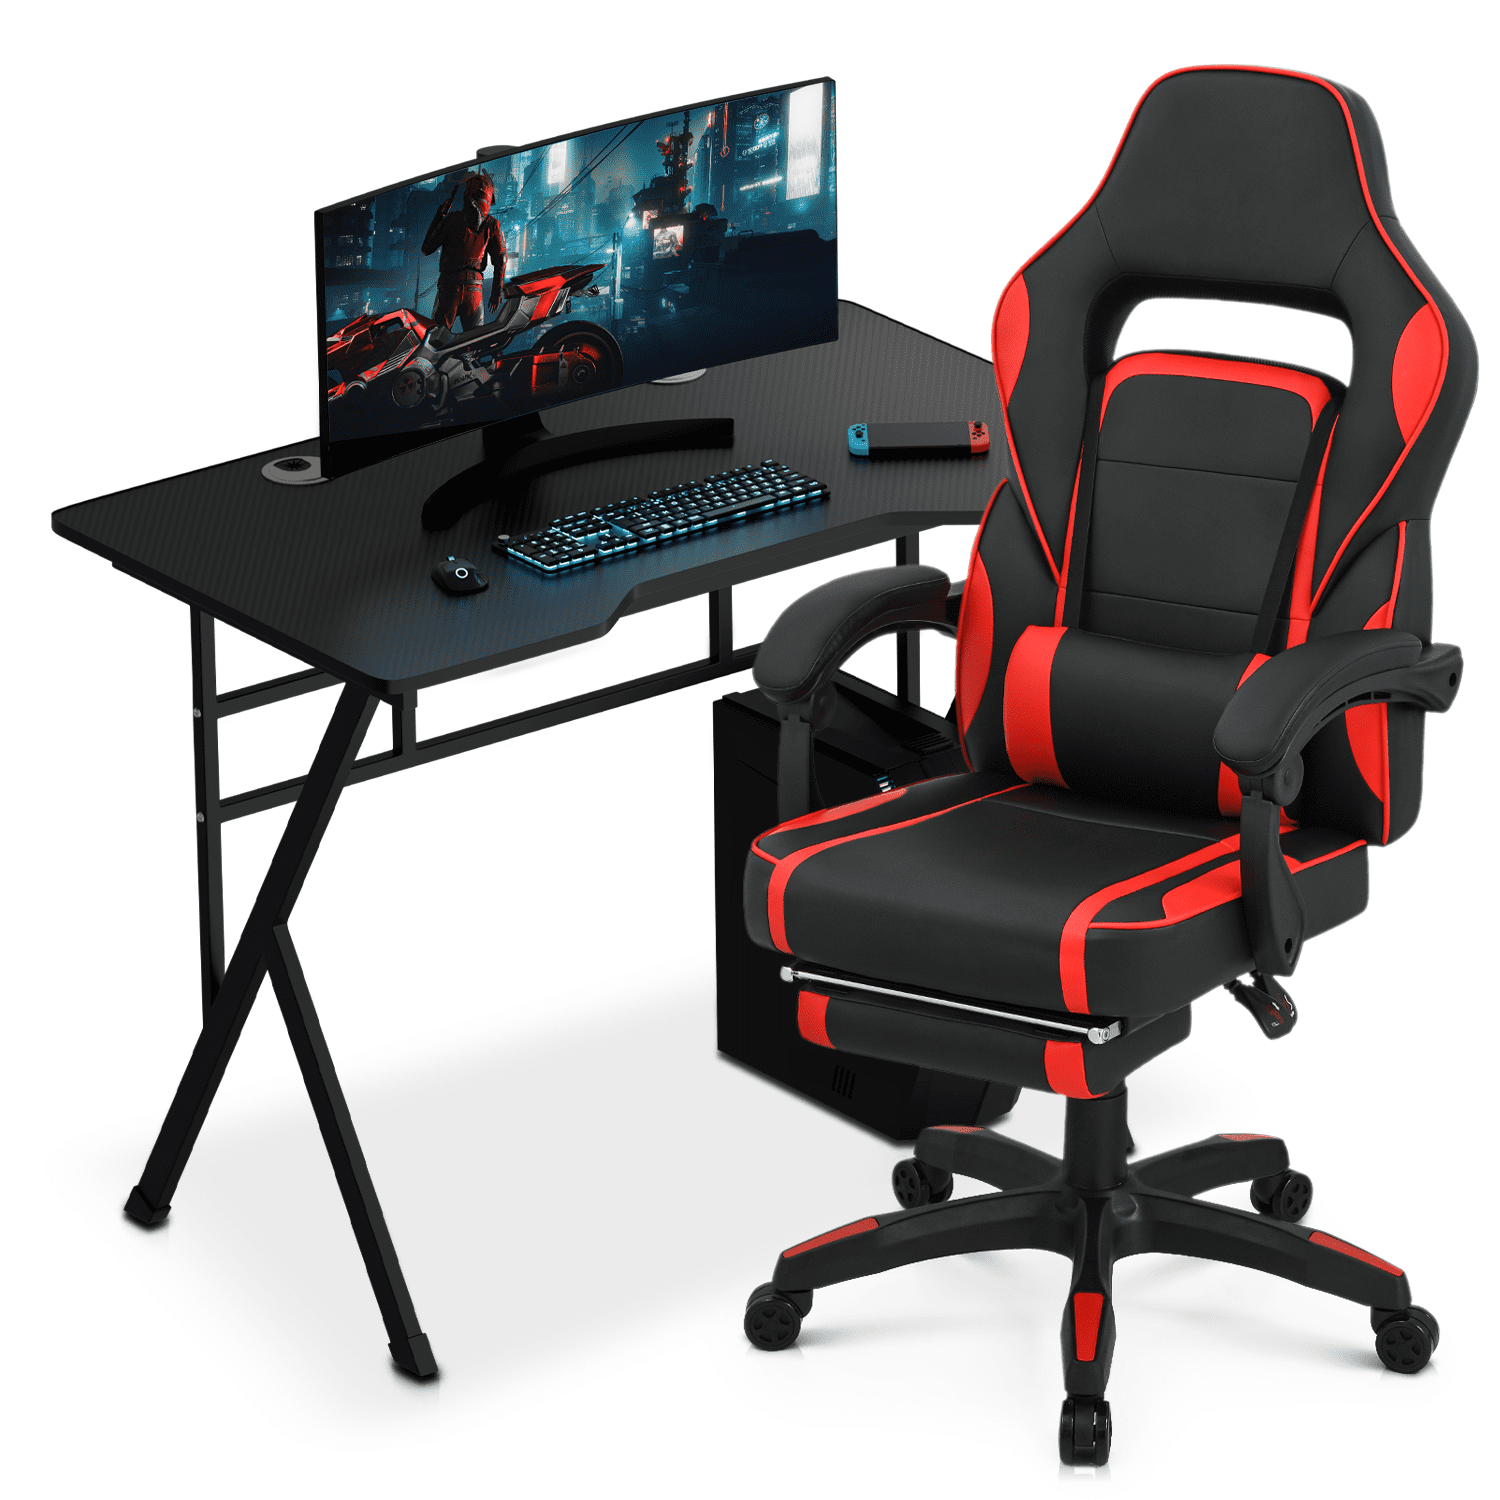 Magshion Computer Desk & Gaming Chair Set, Writing Table with